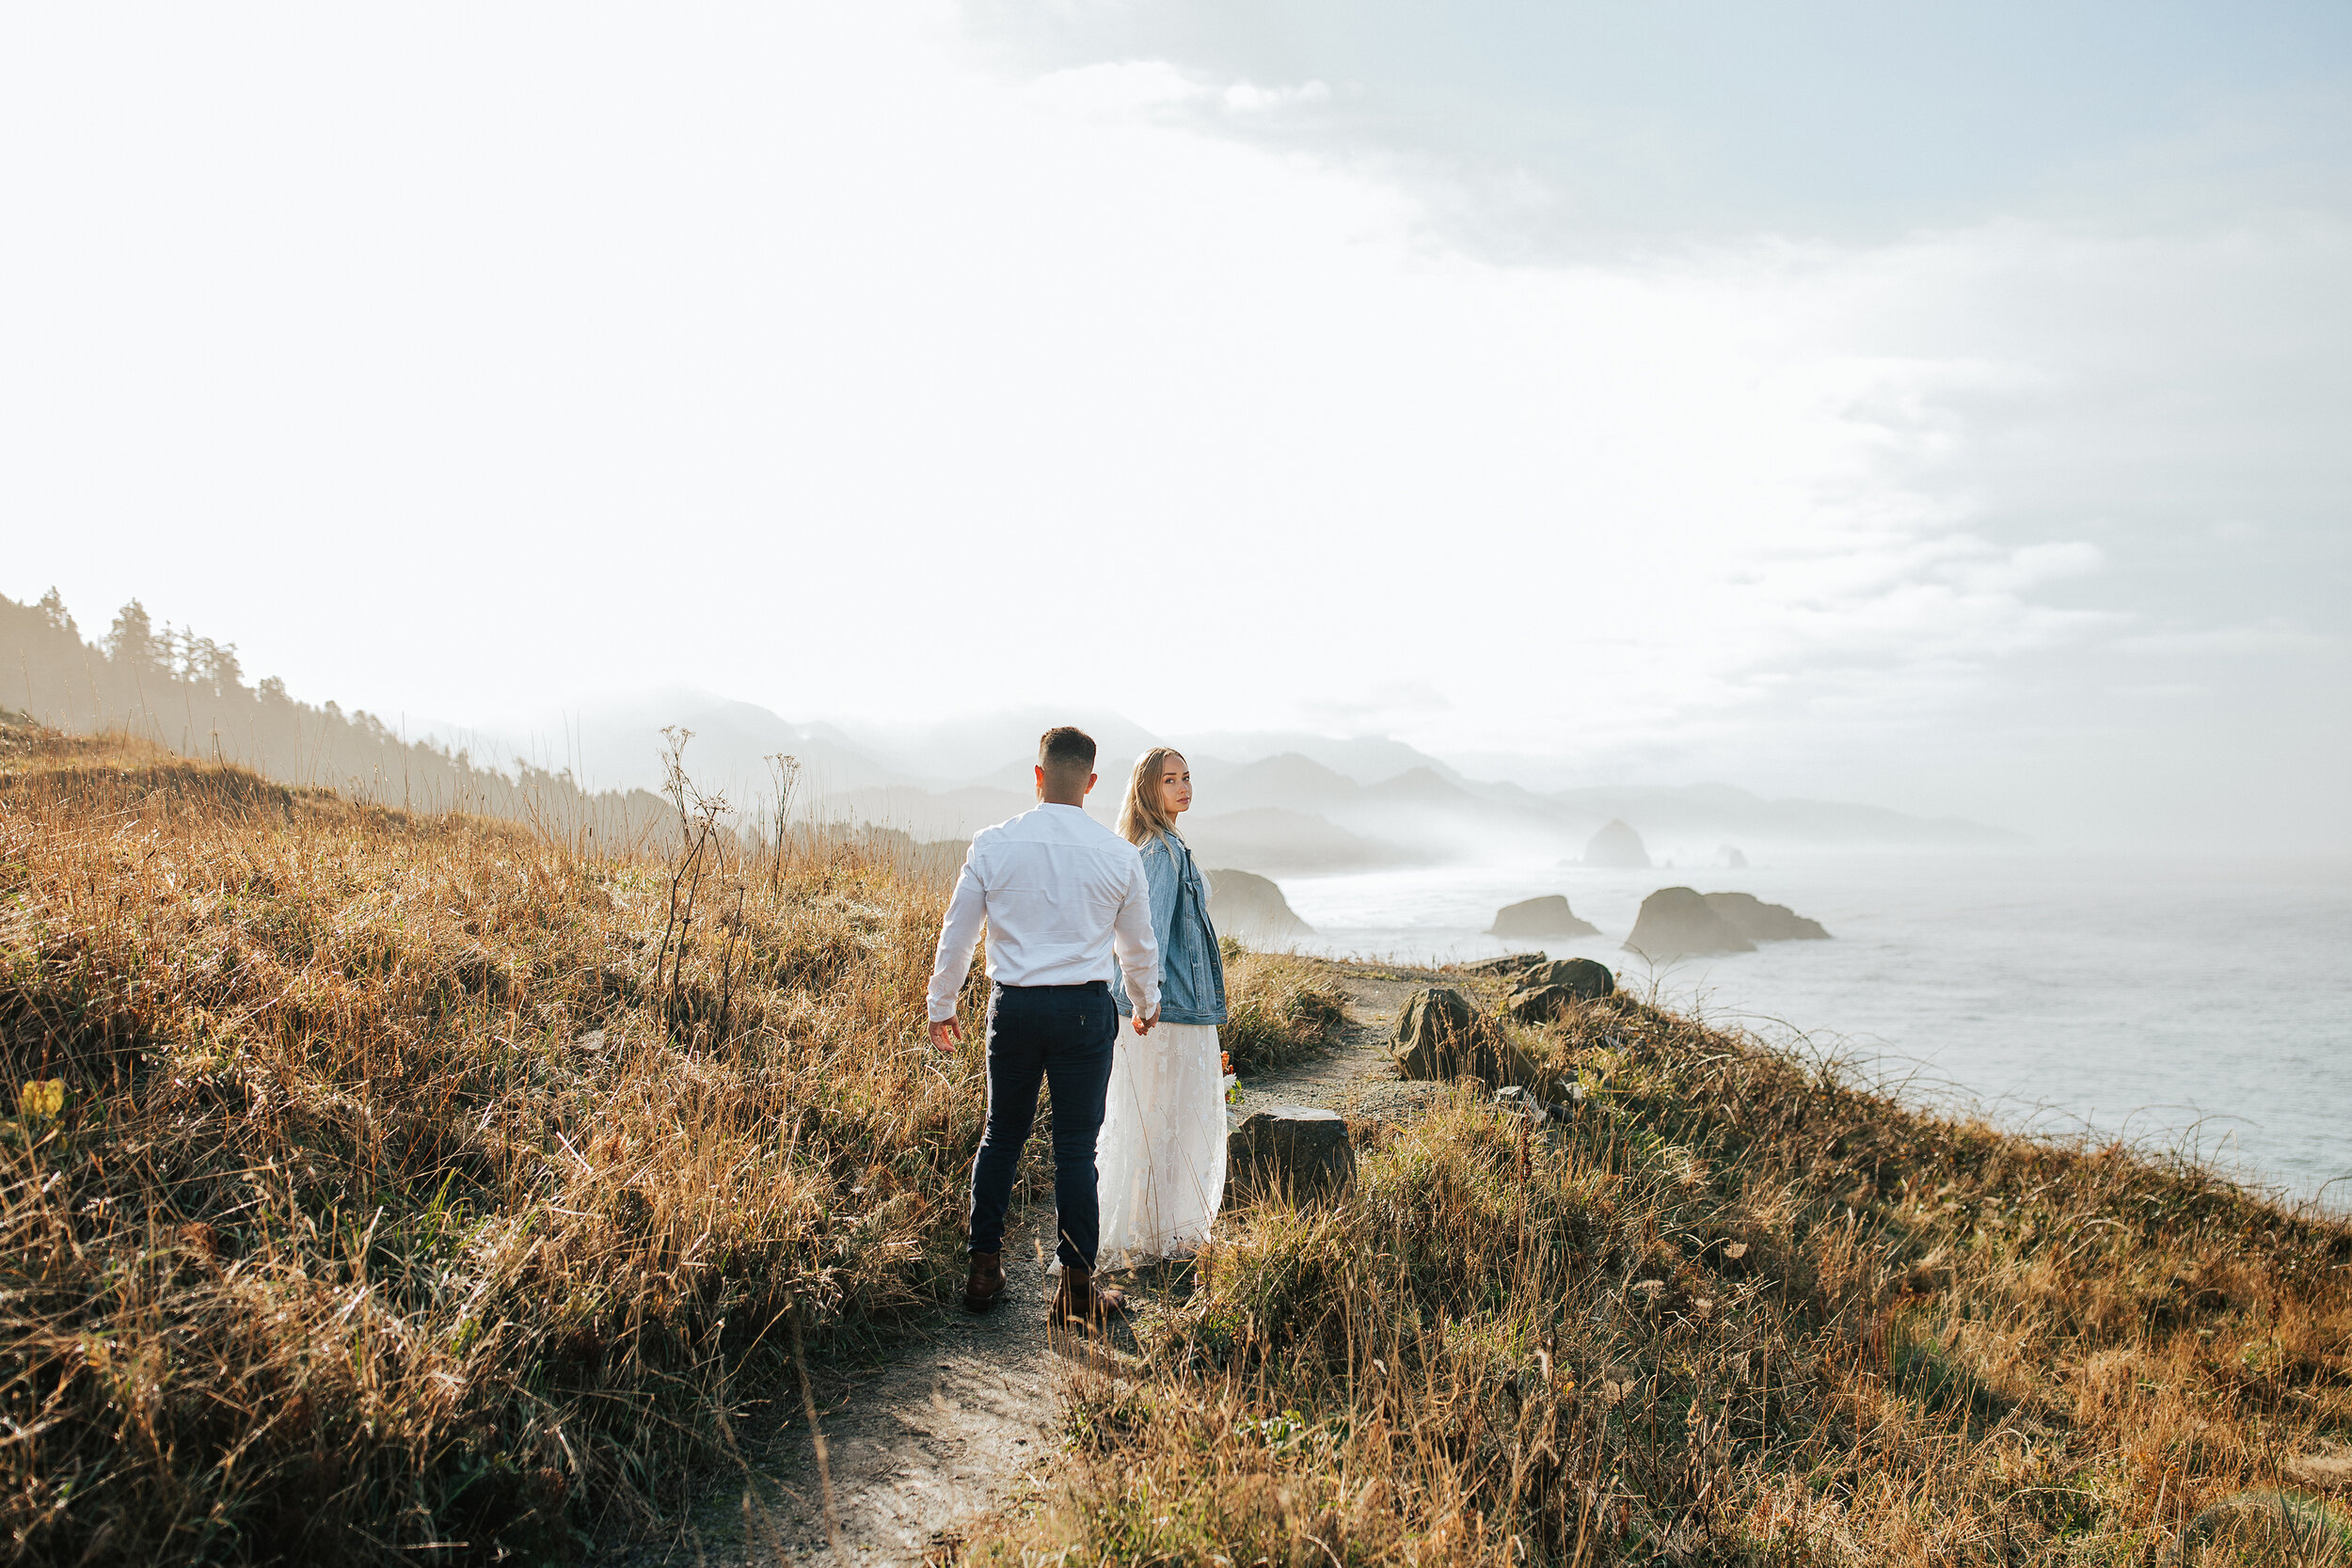  A beautiful couple walk along the cliffs of the Oregon Coast in a stunning bright and airy elopement photo shoot by Emily Jenkins Photography. Three places to elope on the Oregon Coast couple goals couple pose inspiration ideas and goals client atti